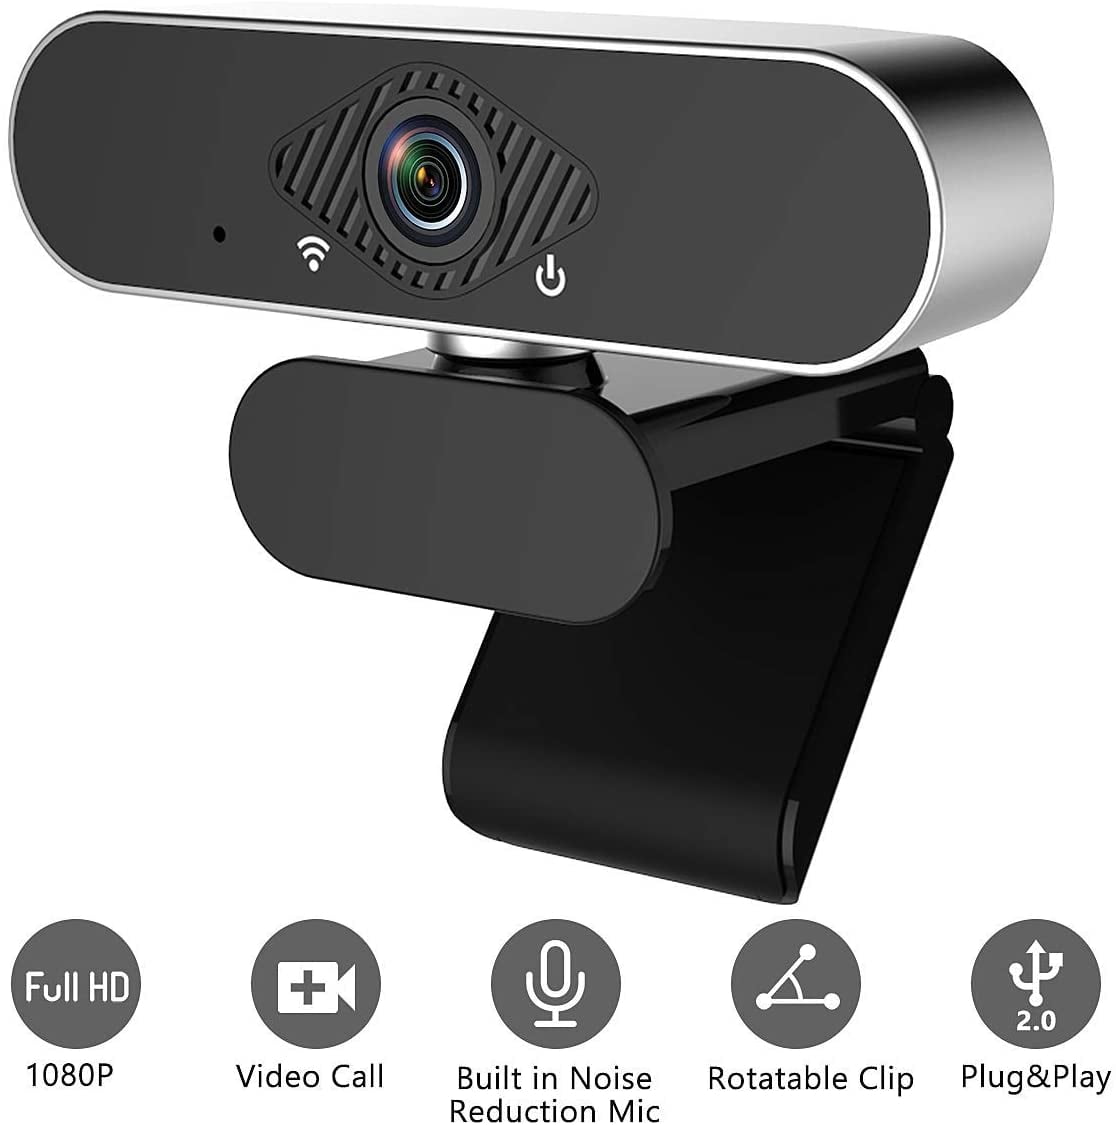 USB Computer Webcam for Video Calling Streaming Computer Web Camera with Support 3D Denoising and Automatic Gain PC Webcam Webcam Webcam with Microphone Online Classes and Video Conference